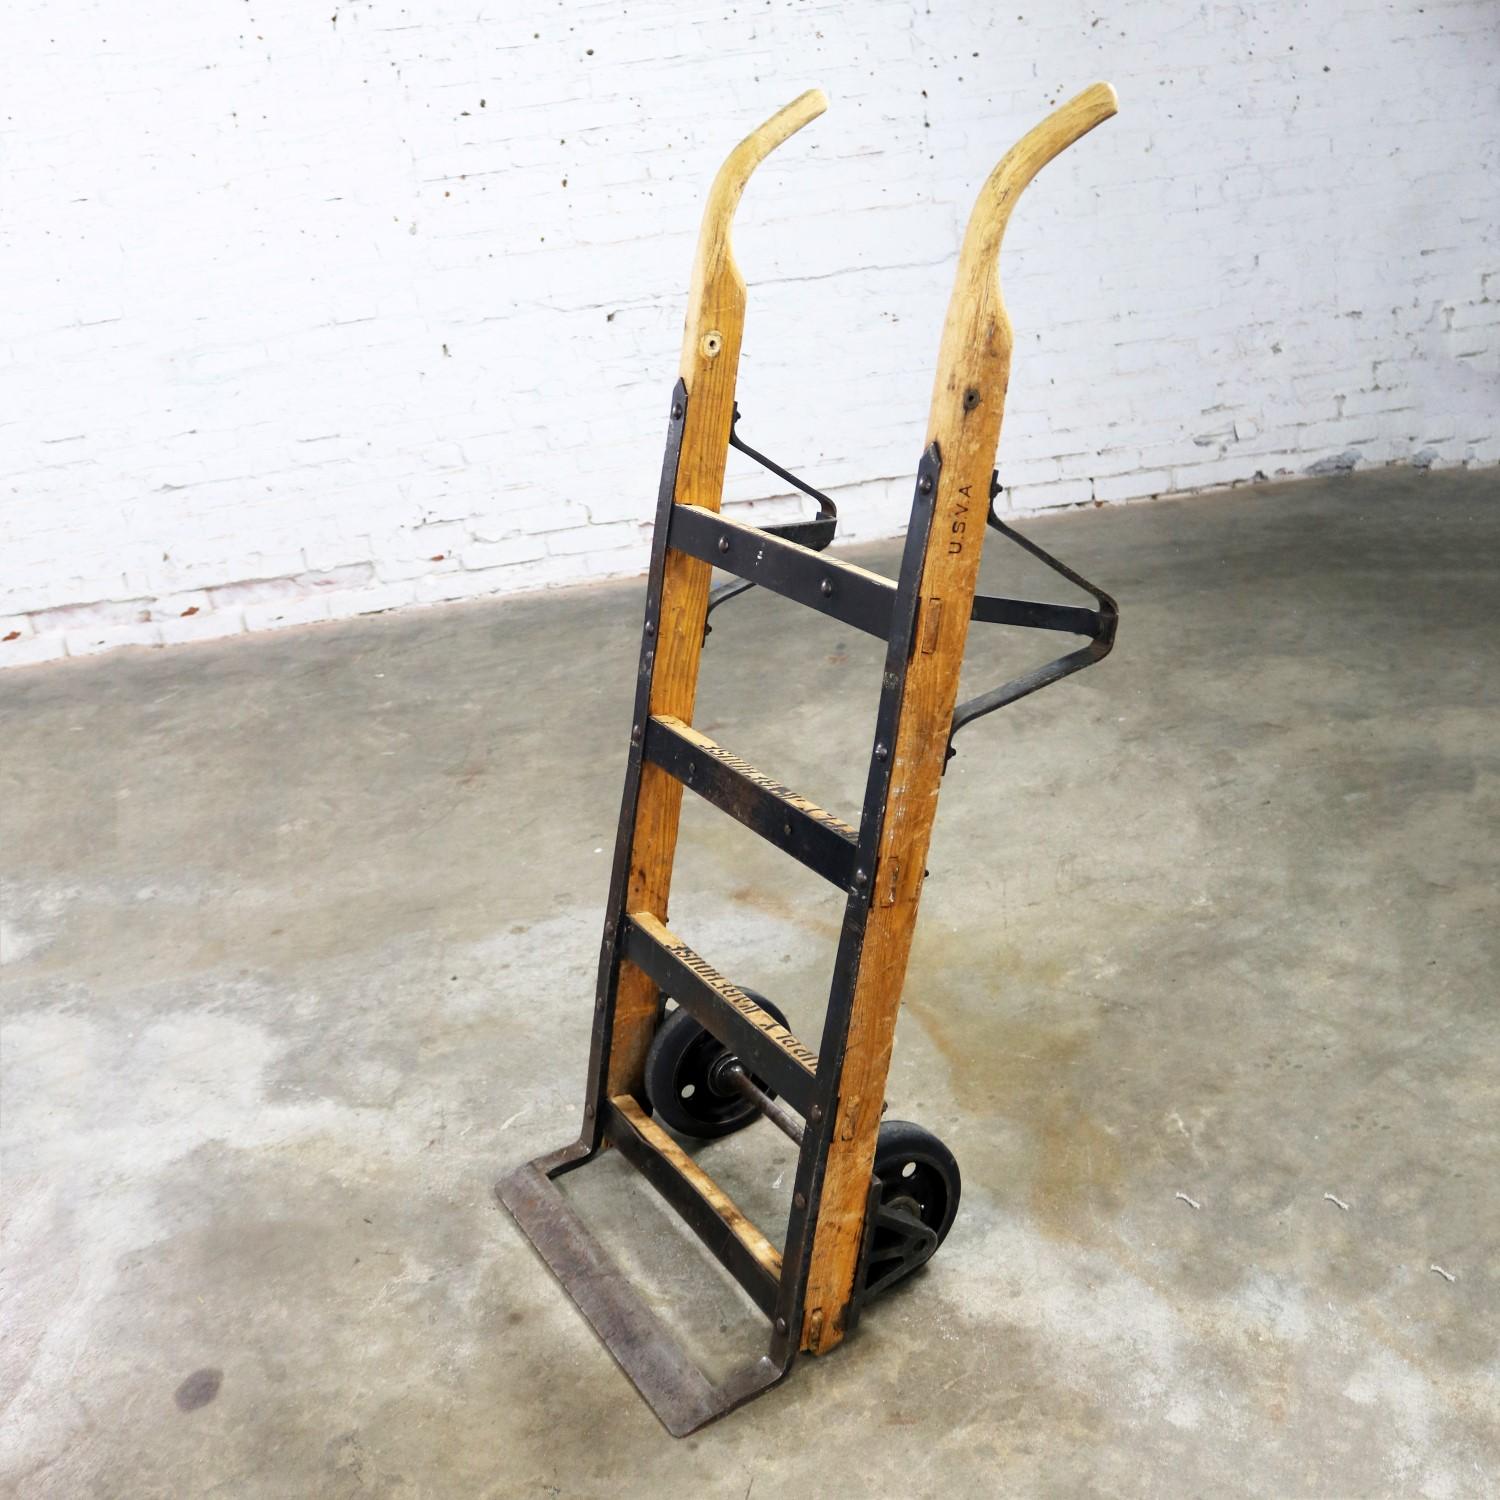 Awesome antique Industrial oak and hand-forged iron hand truck or trolley. It is marked K&J Columbus, Ohio. This would be an incredible start to a cool Industrial coffee table. It is in fabulous vintage condition with lots of gorgeous age patina.